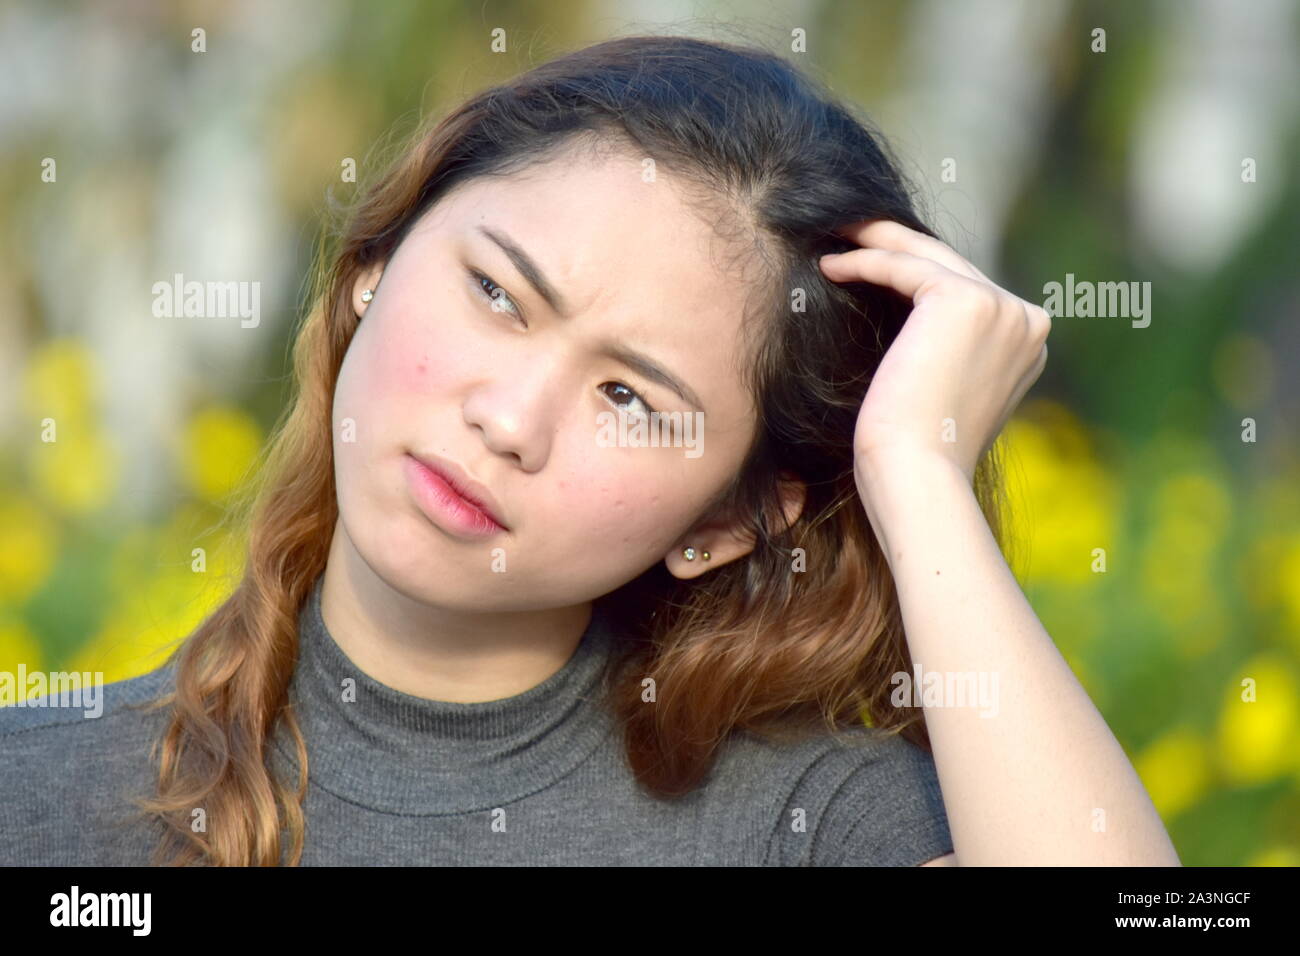 Young Female And Confusion Stock Photo